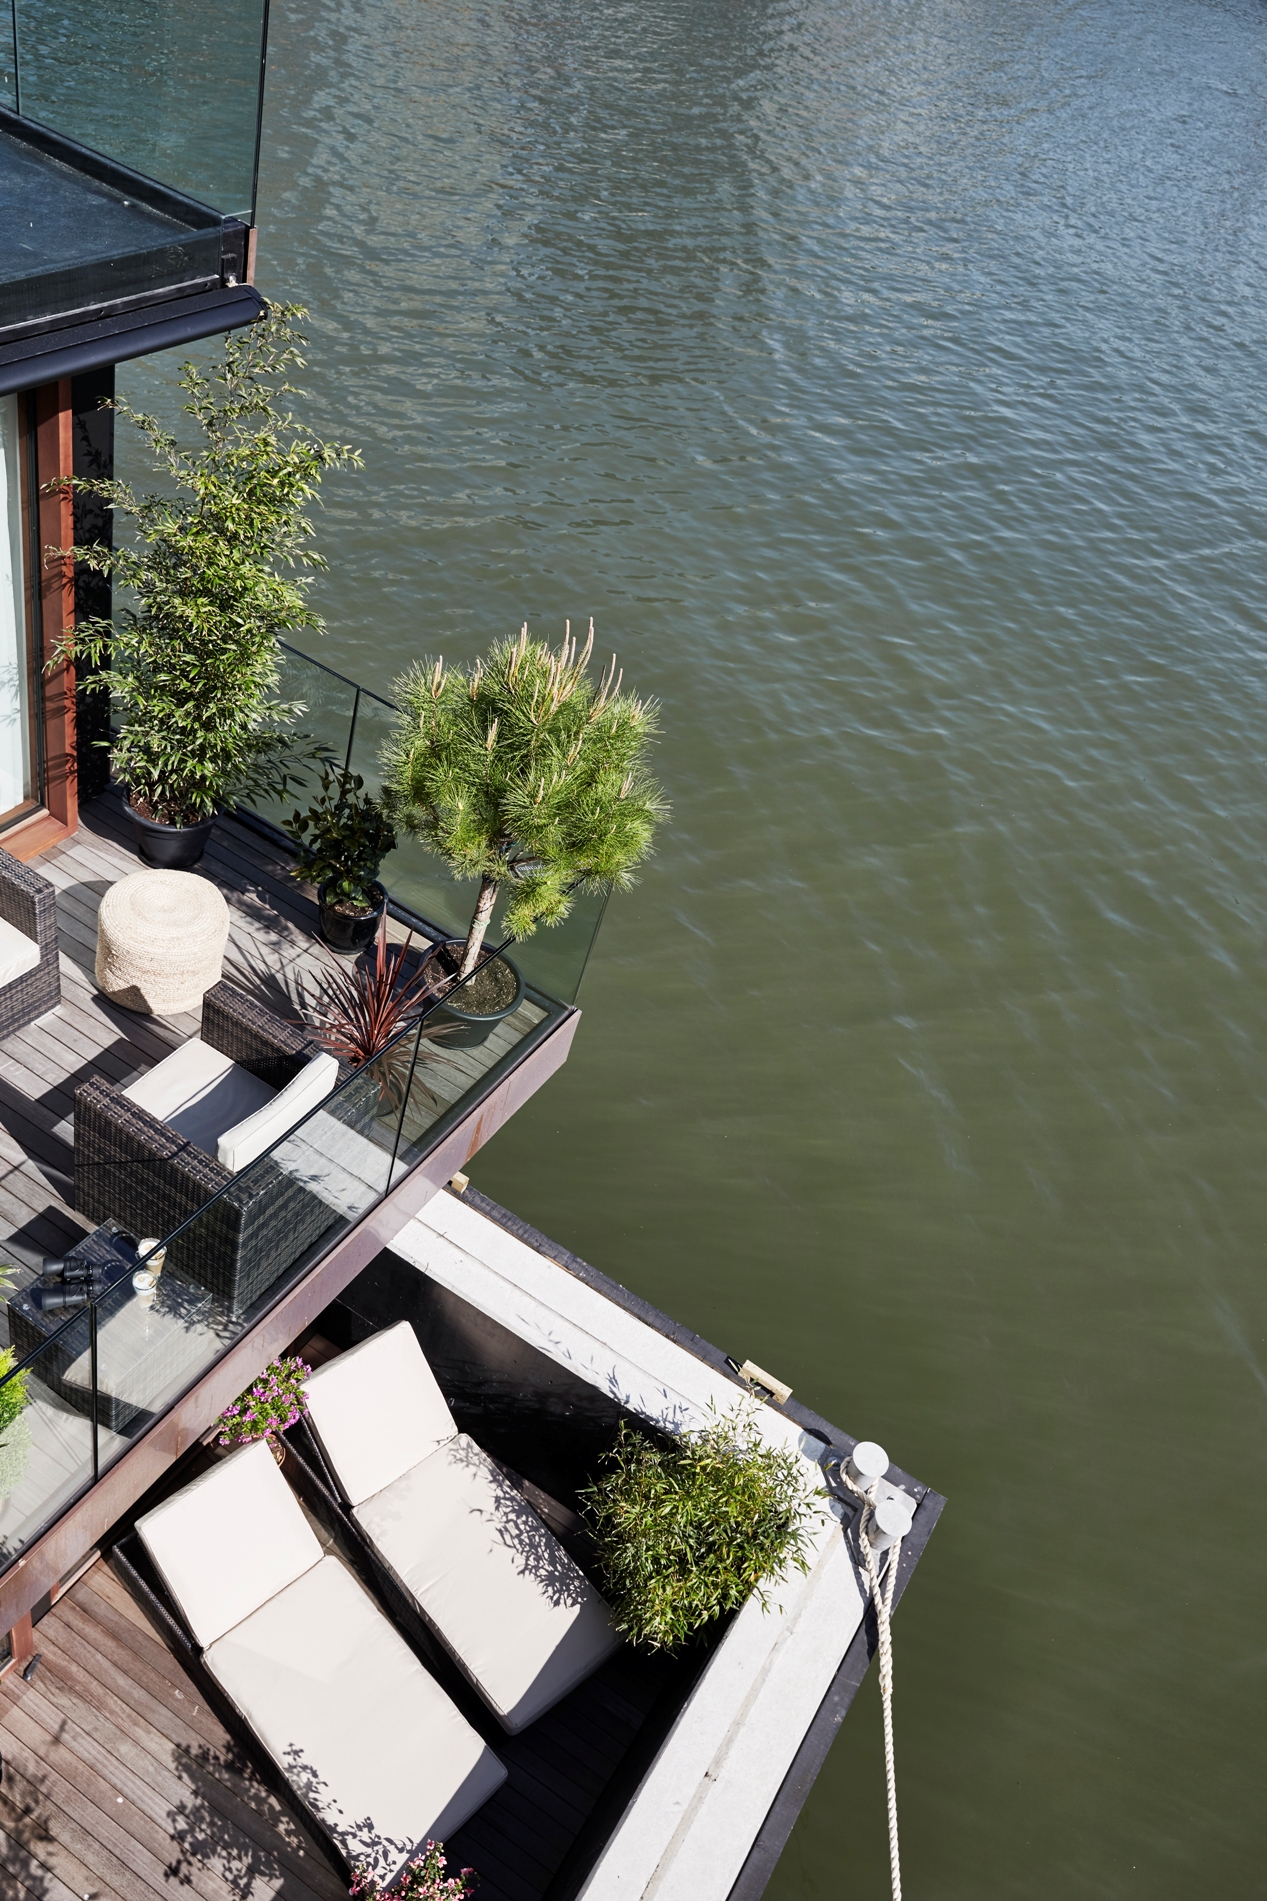 Floating home by Dirkmarine / House on Water Ltd. - concrete hull HUBB®